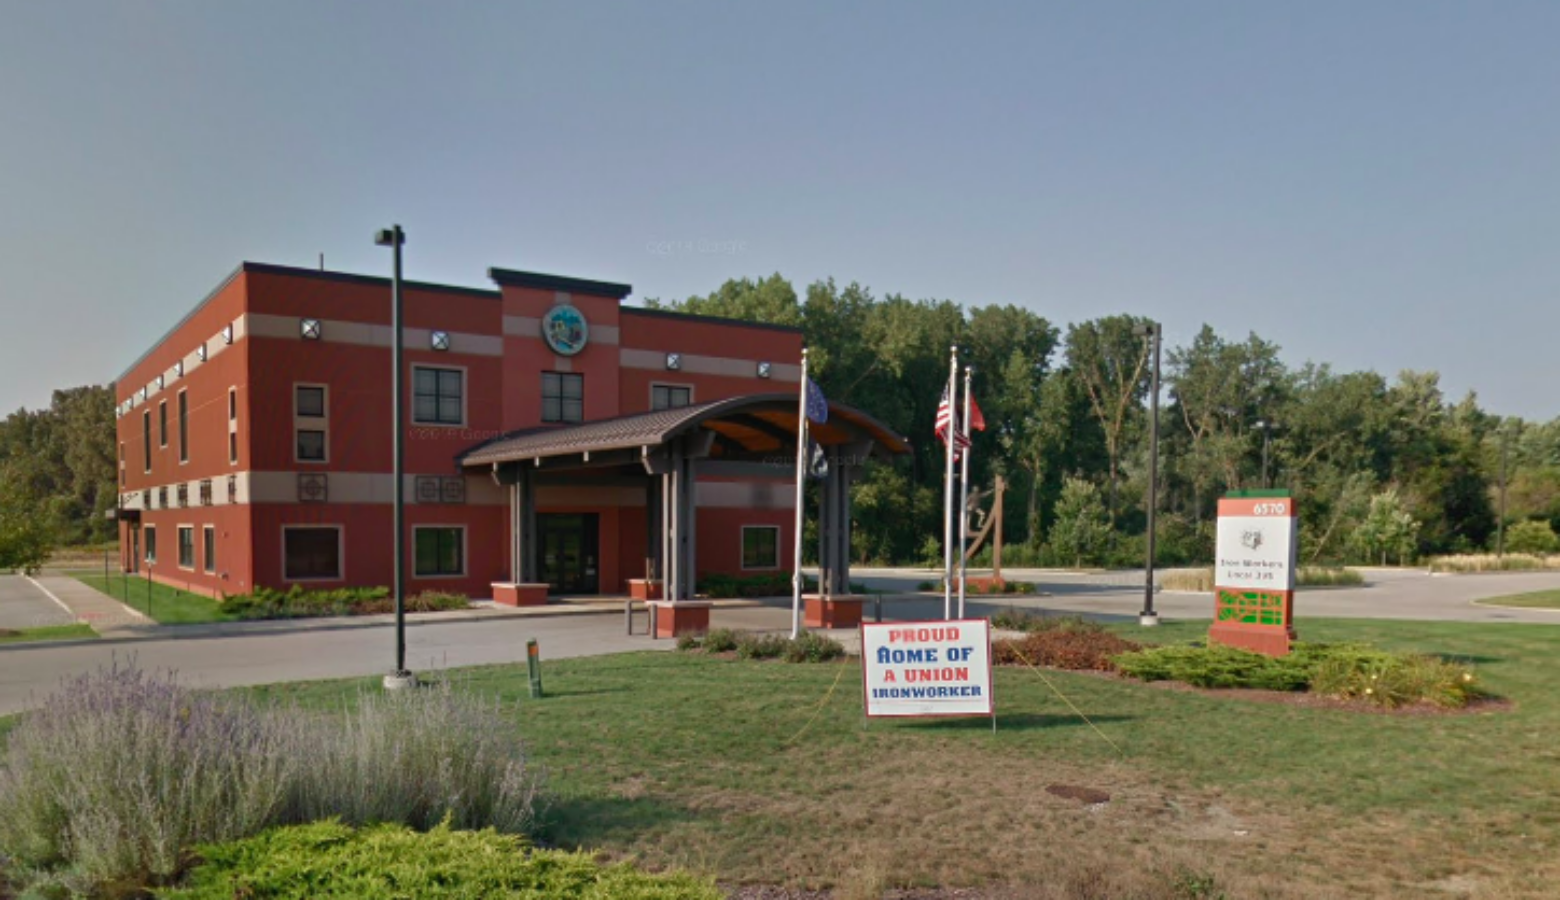 The headquarters of Iron Workers Local #395 in Portage, Indiana. (Courtesy of Google Maps)